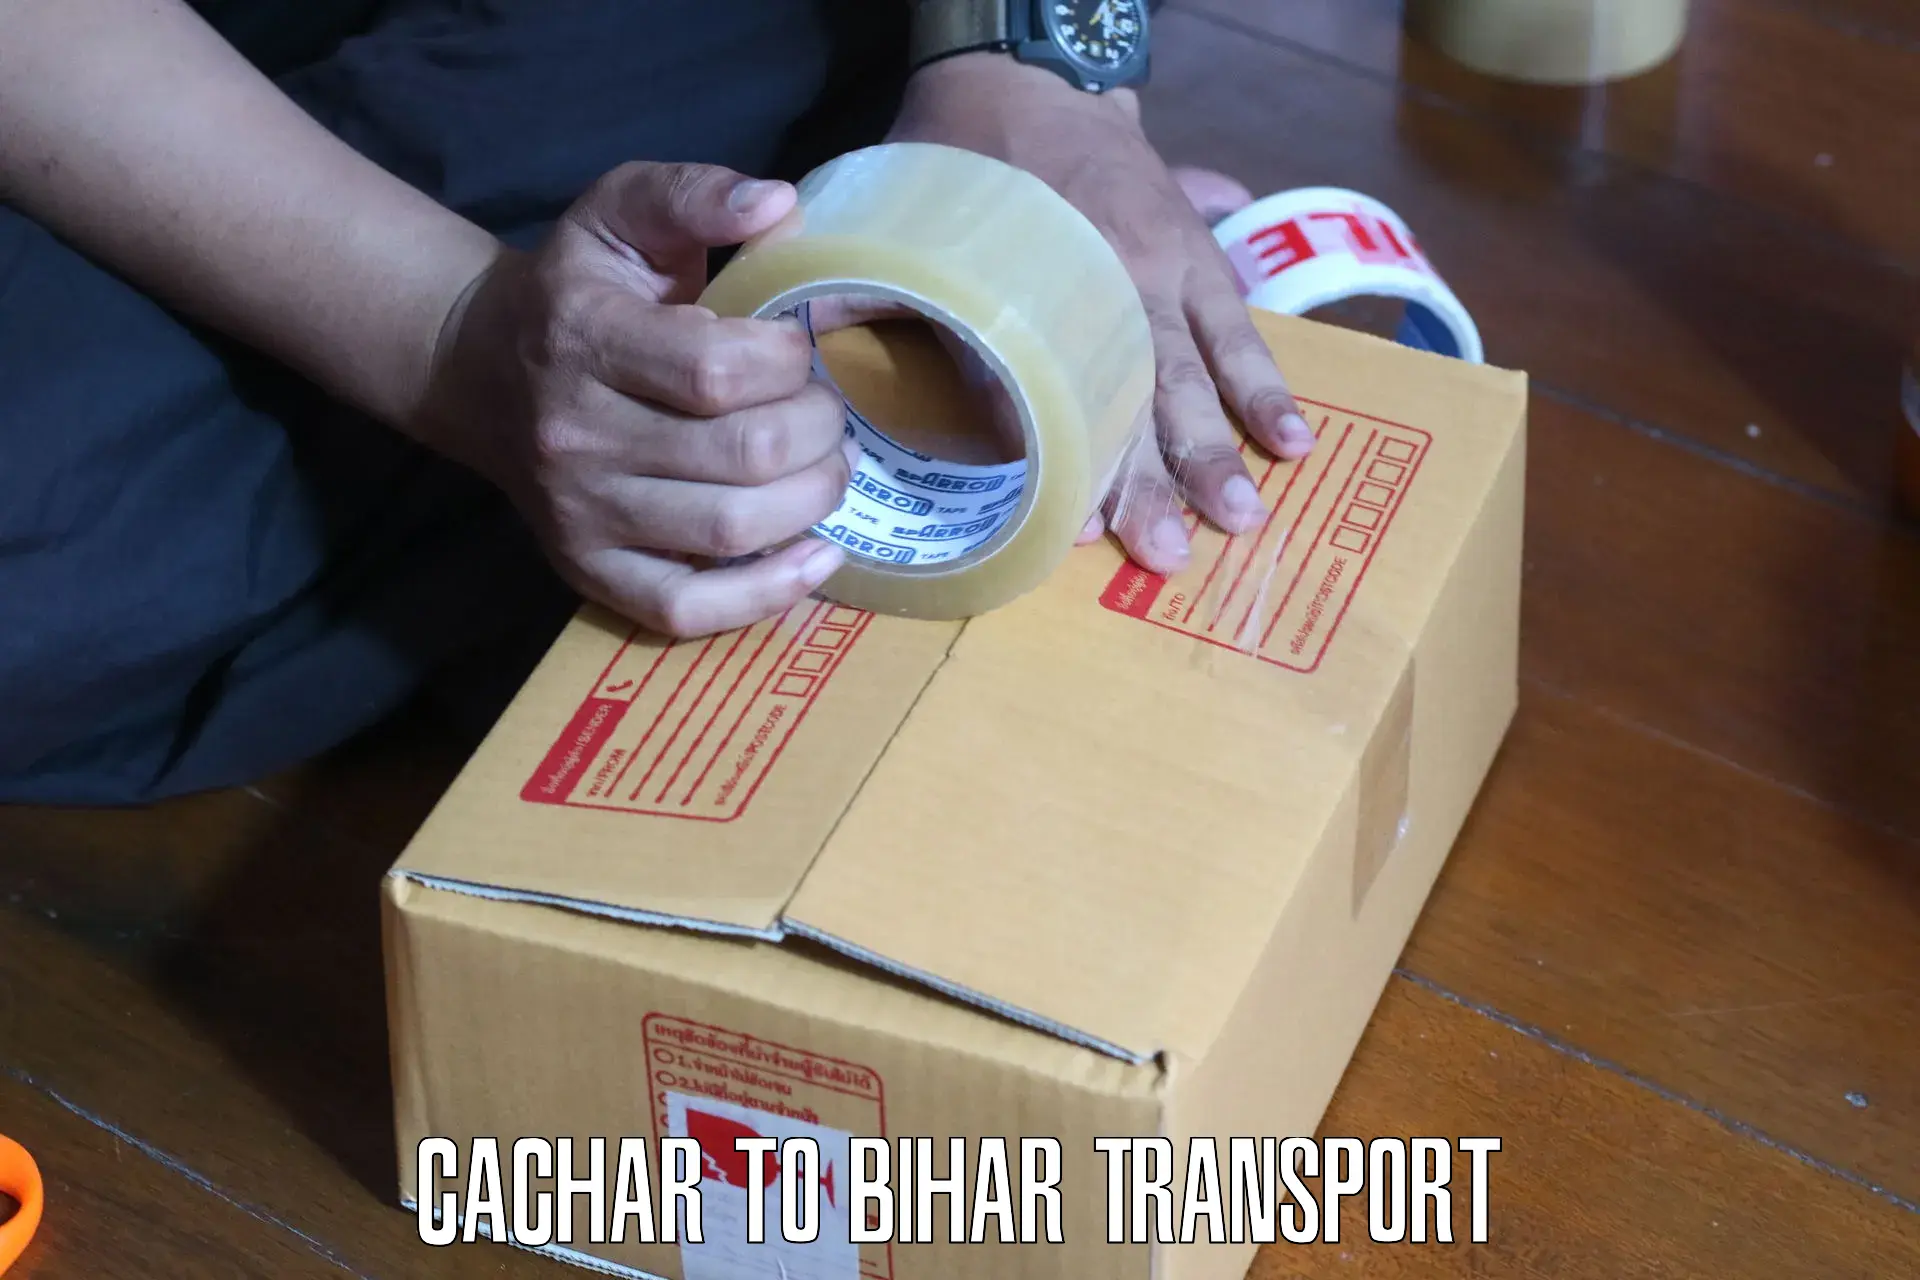 Air freight transport services Cachar to Brahmapur